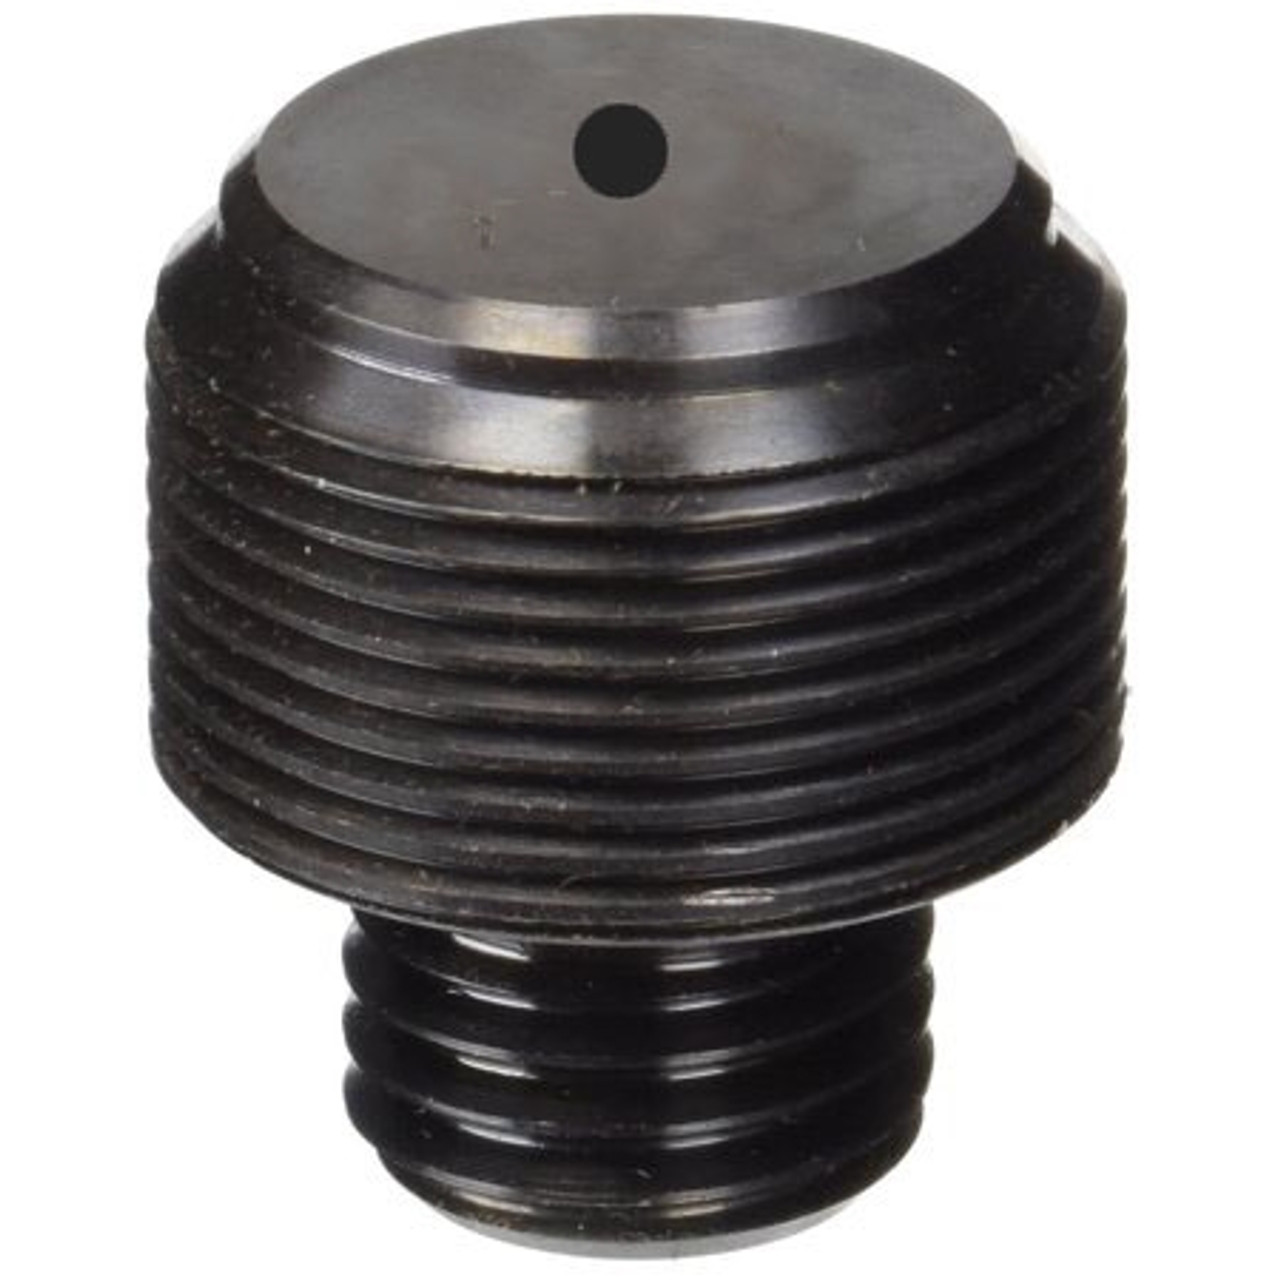 Replacement Chief tower Ram Threaded adapter